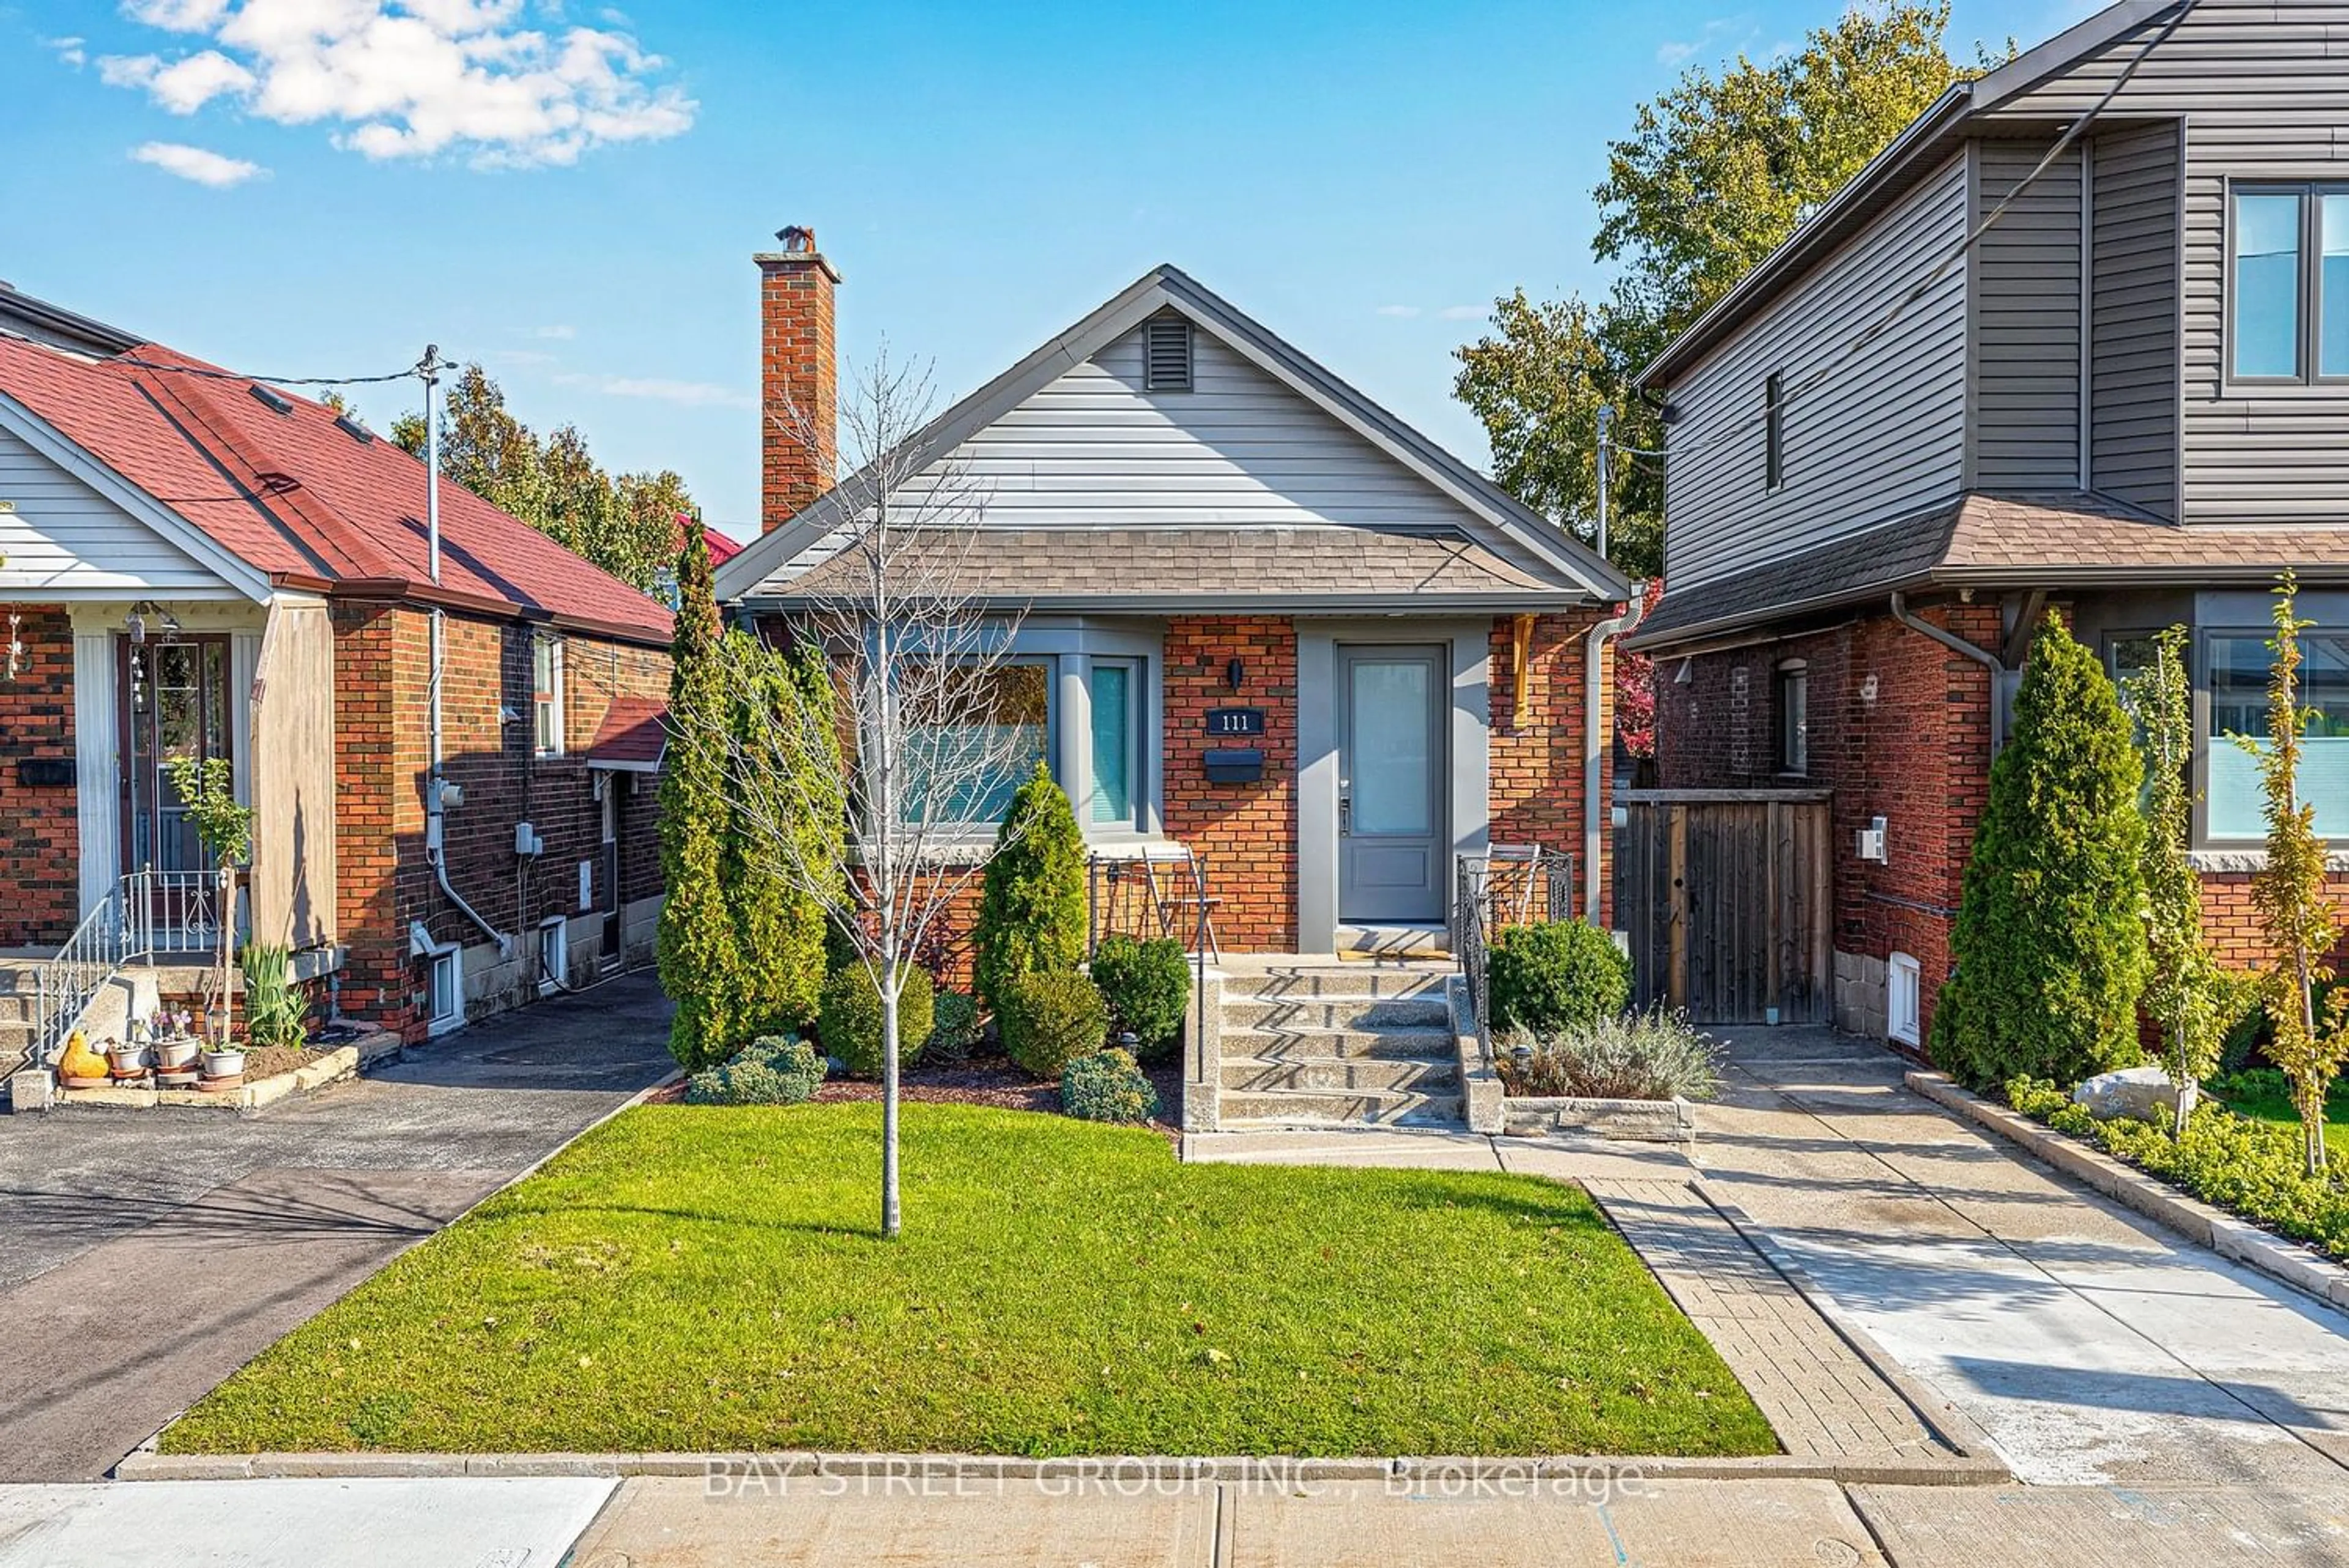 Home with brick exterior material for 111 Frankdale Ave, Toronto Ontario M4J 4A4